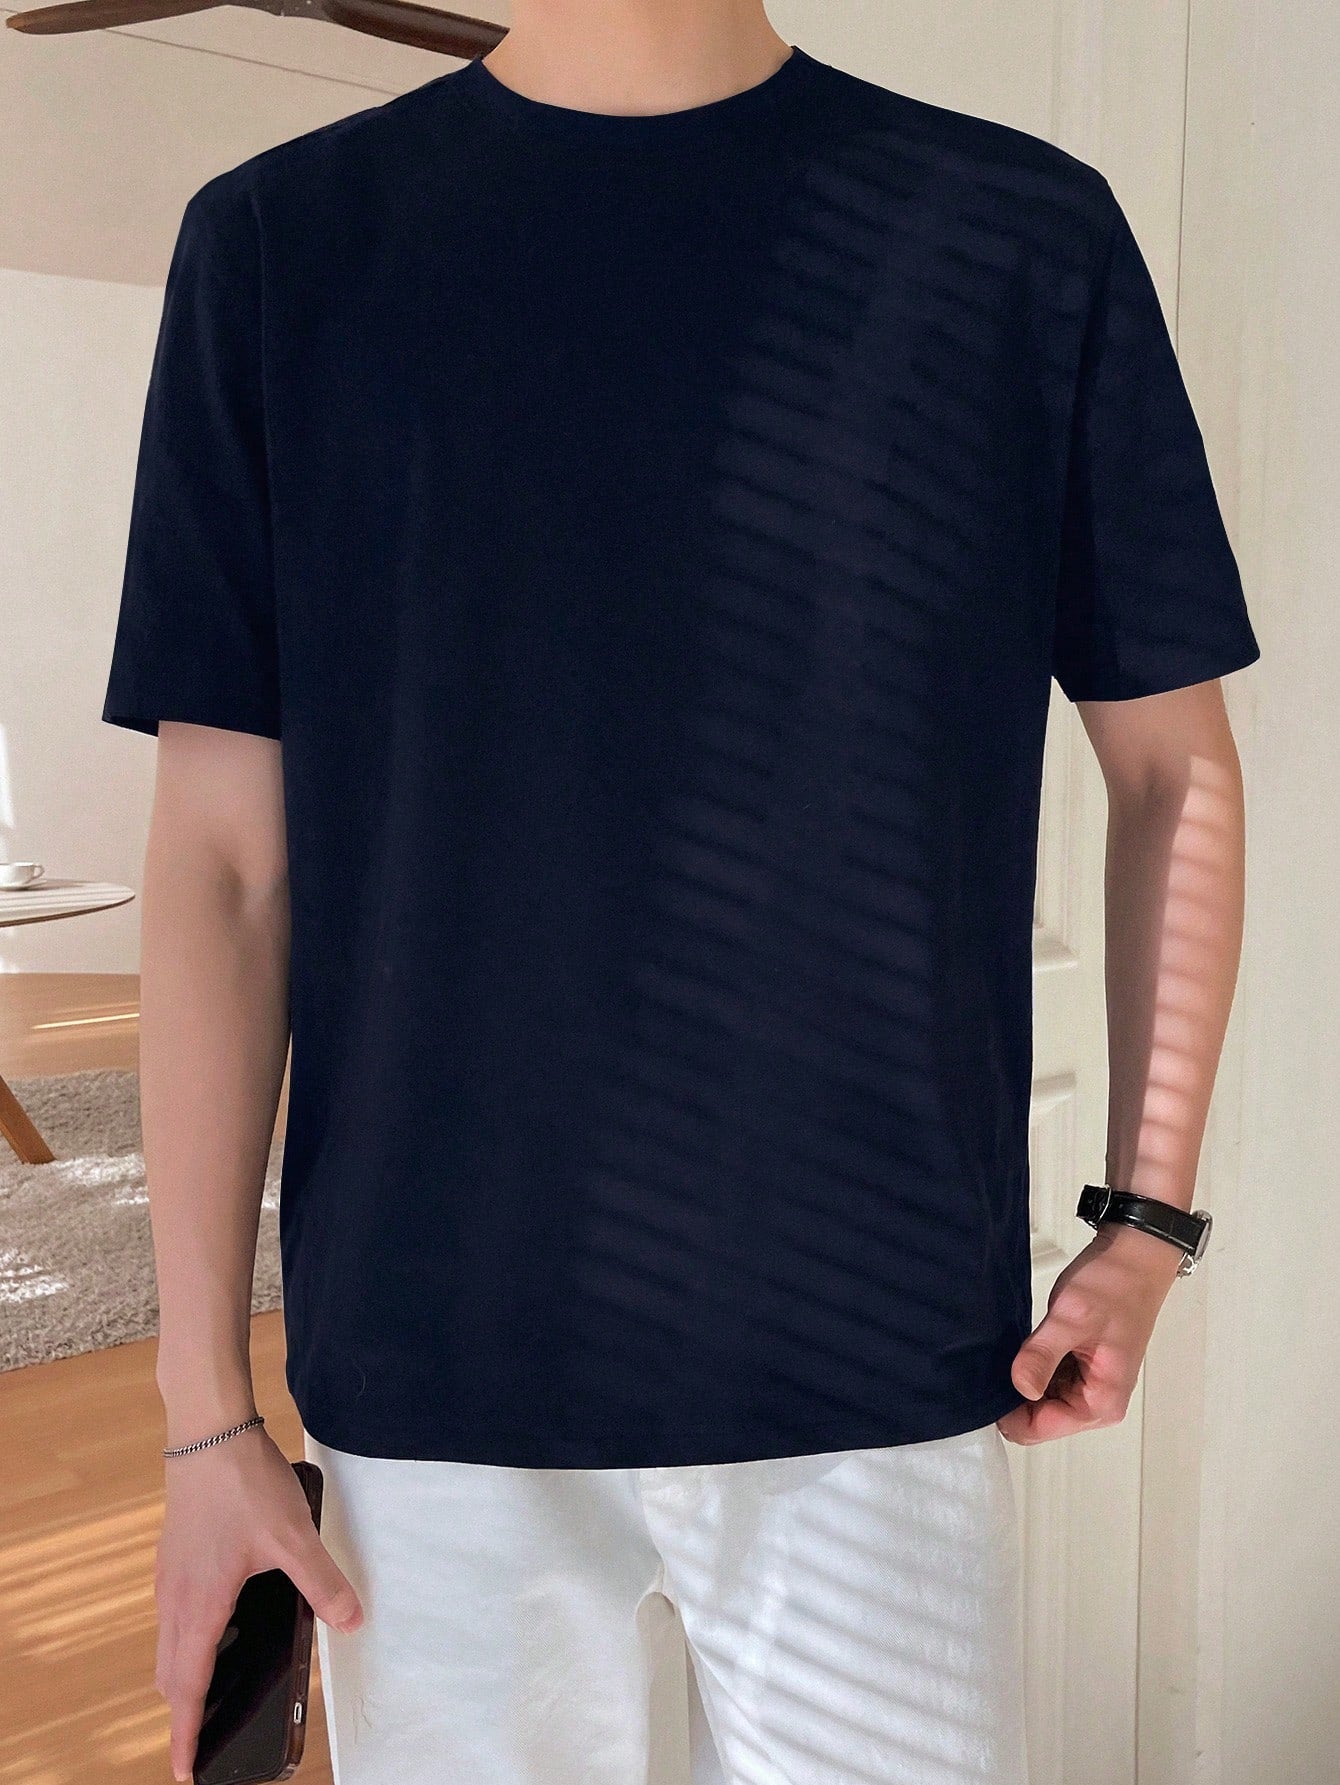 Men's Solid Color Round Neck Short Sleeve Sports T-Shirt For Summer Casual Wear